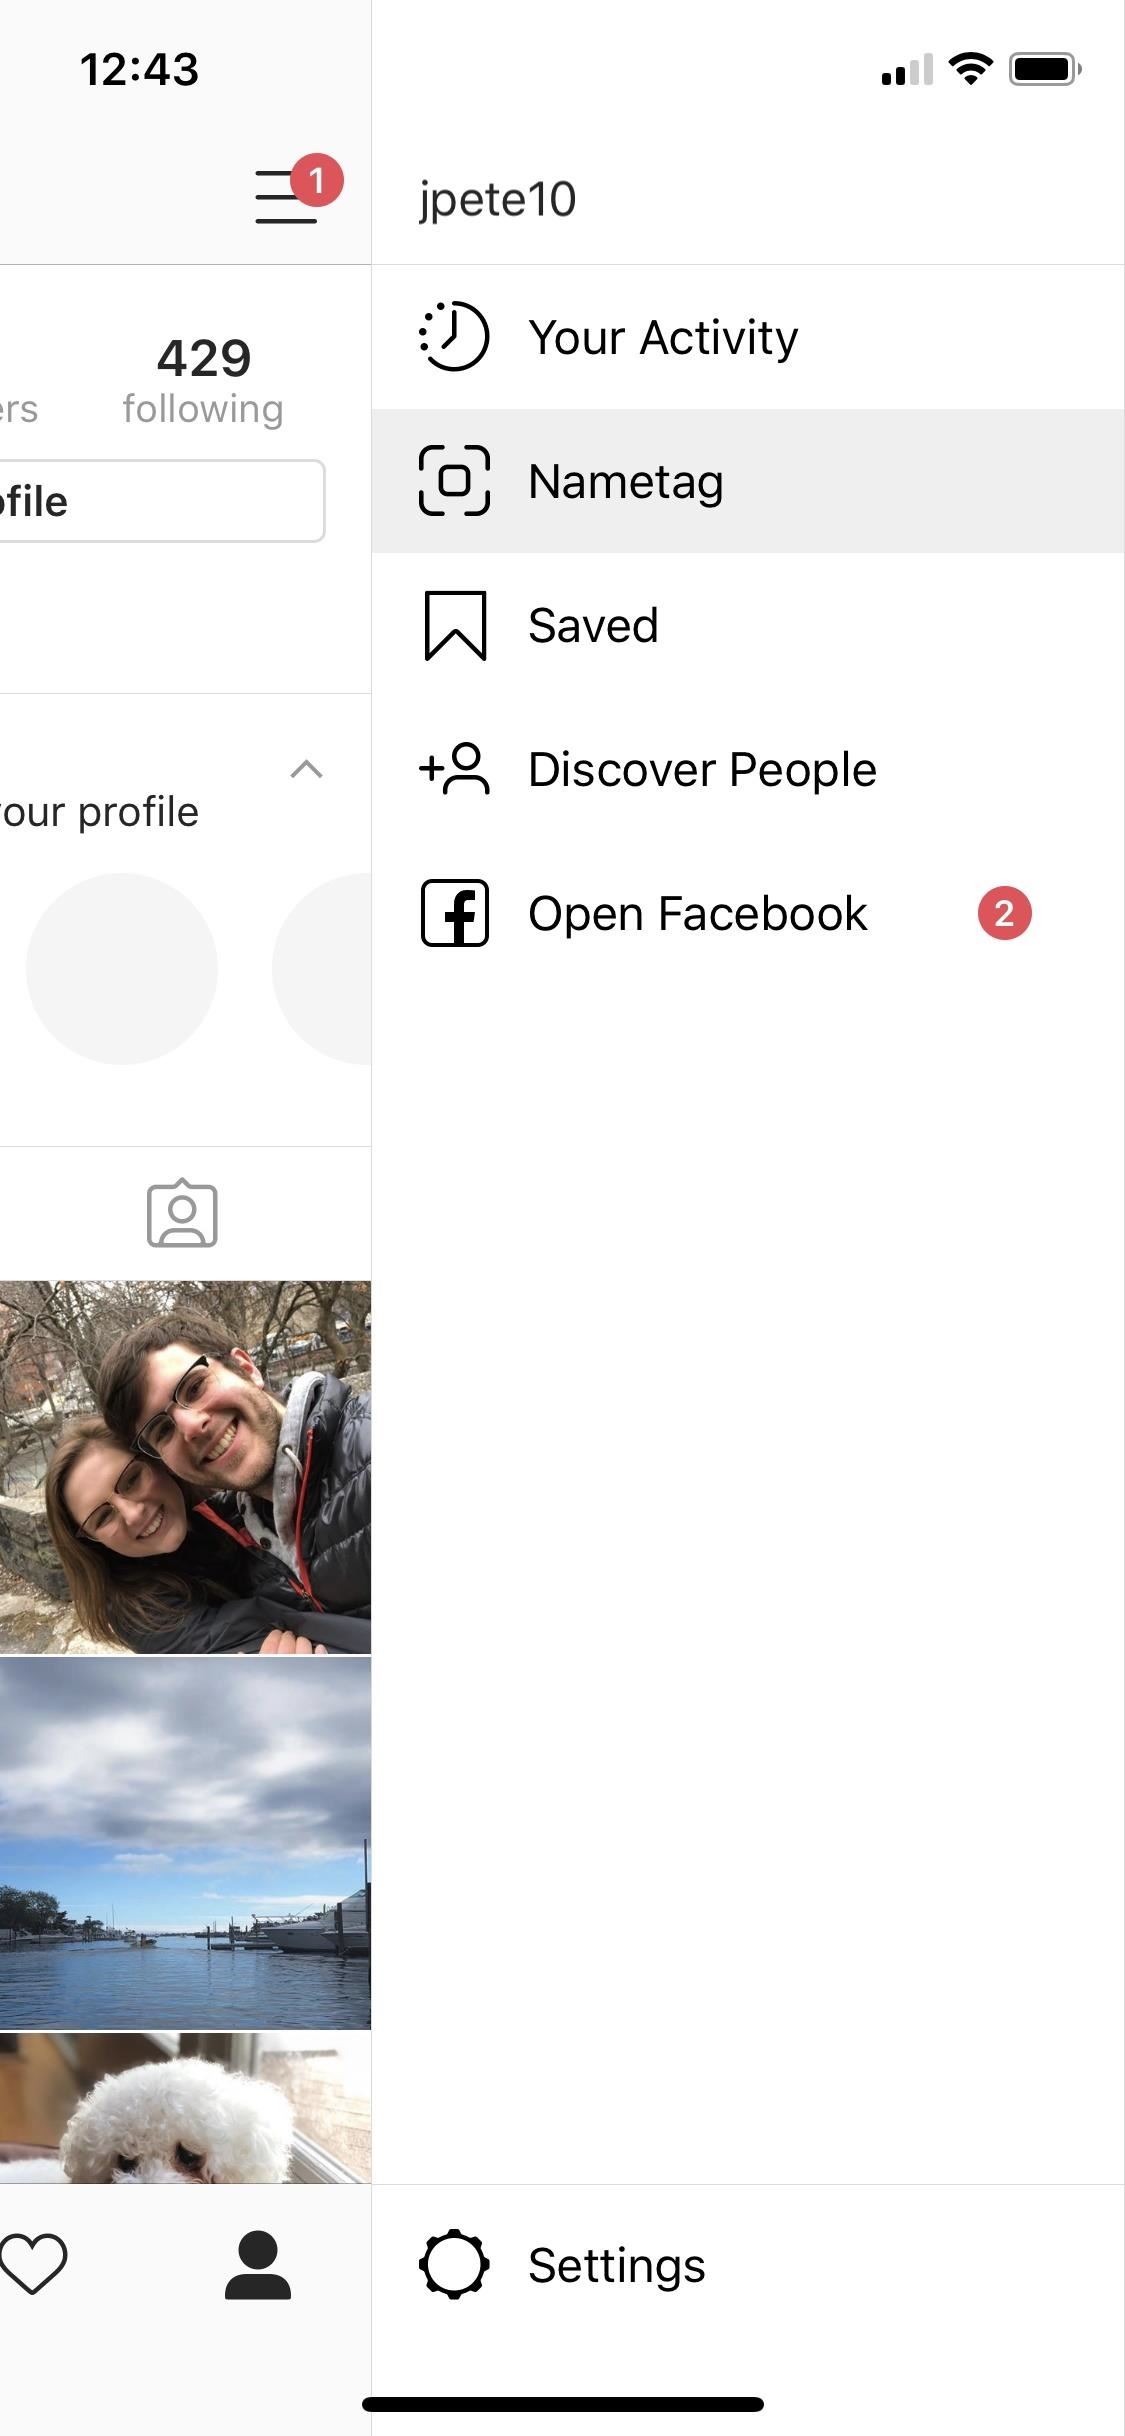 Instagram 101: How to Use Nametags to Quickly Add New Friends